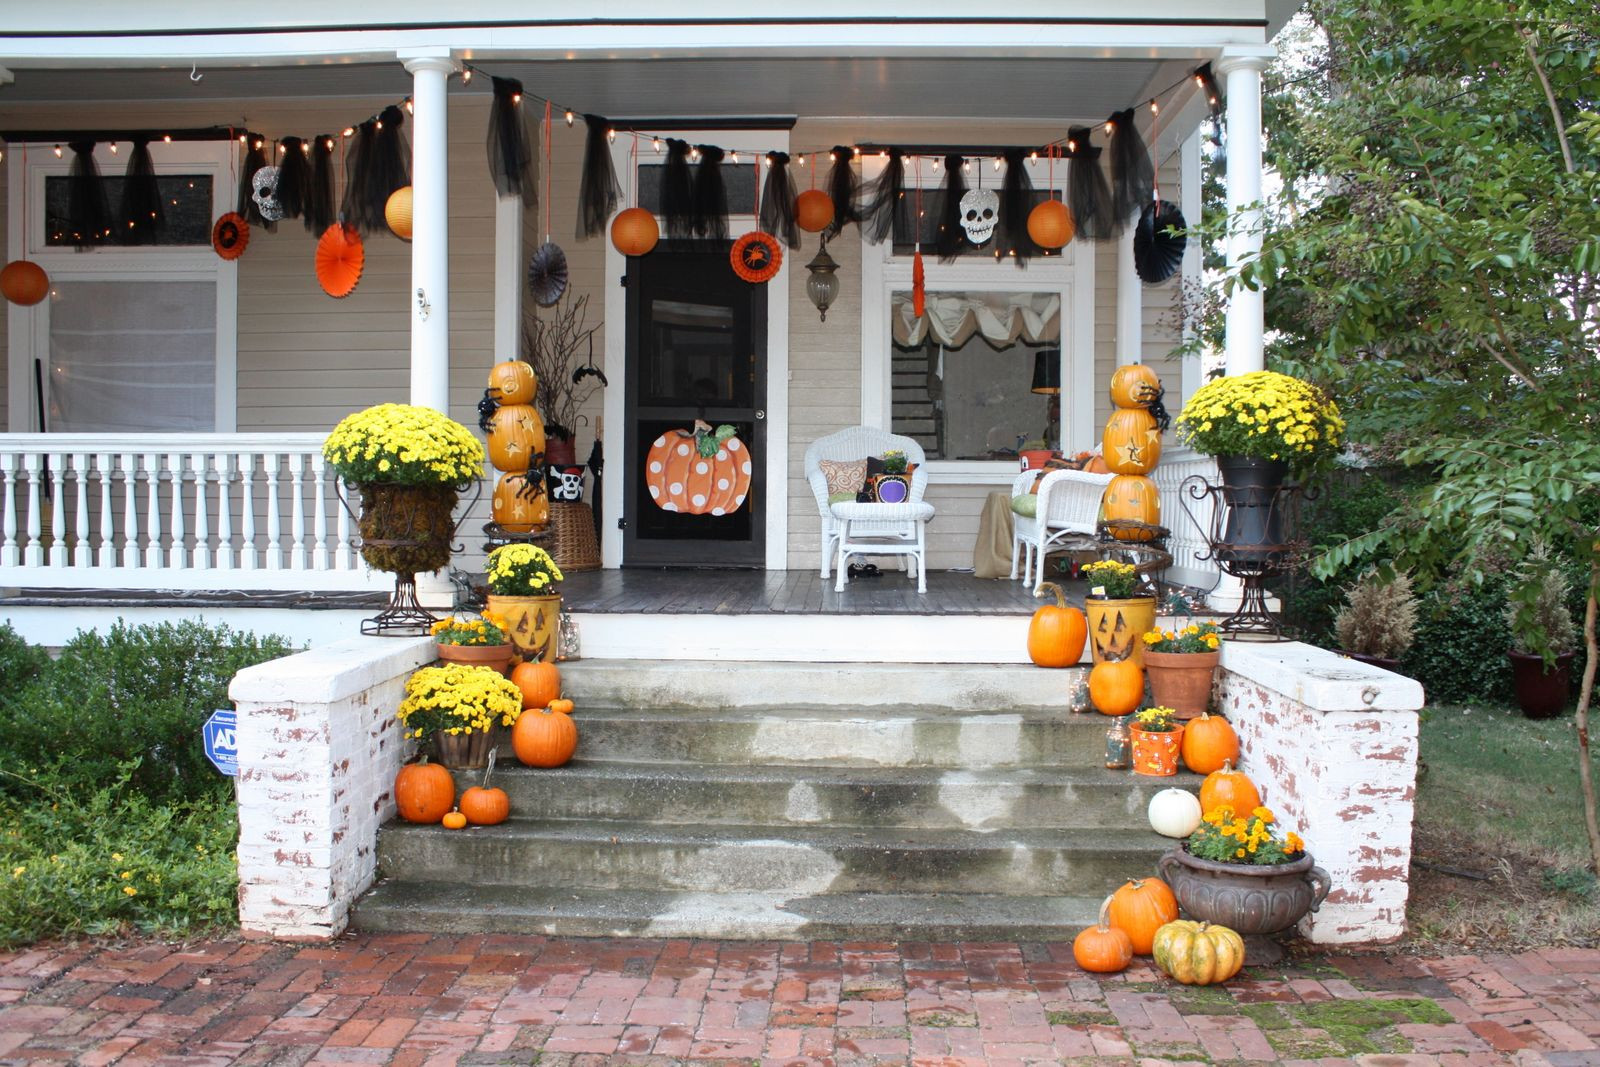 Porch Decorations For Halloween
 Our Southern Nest Whimsical Halloween Decorations